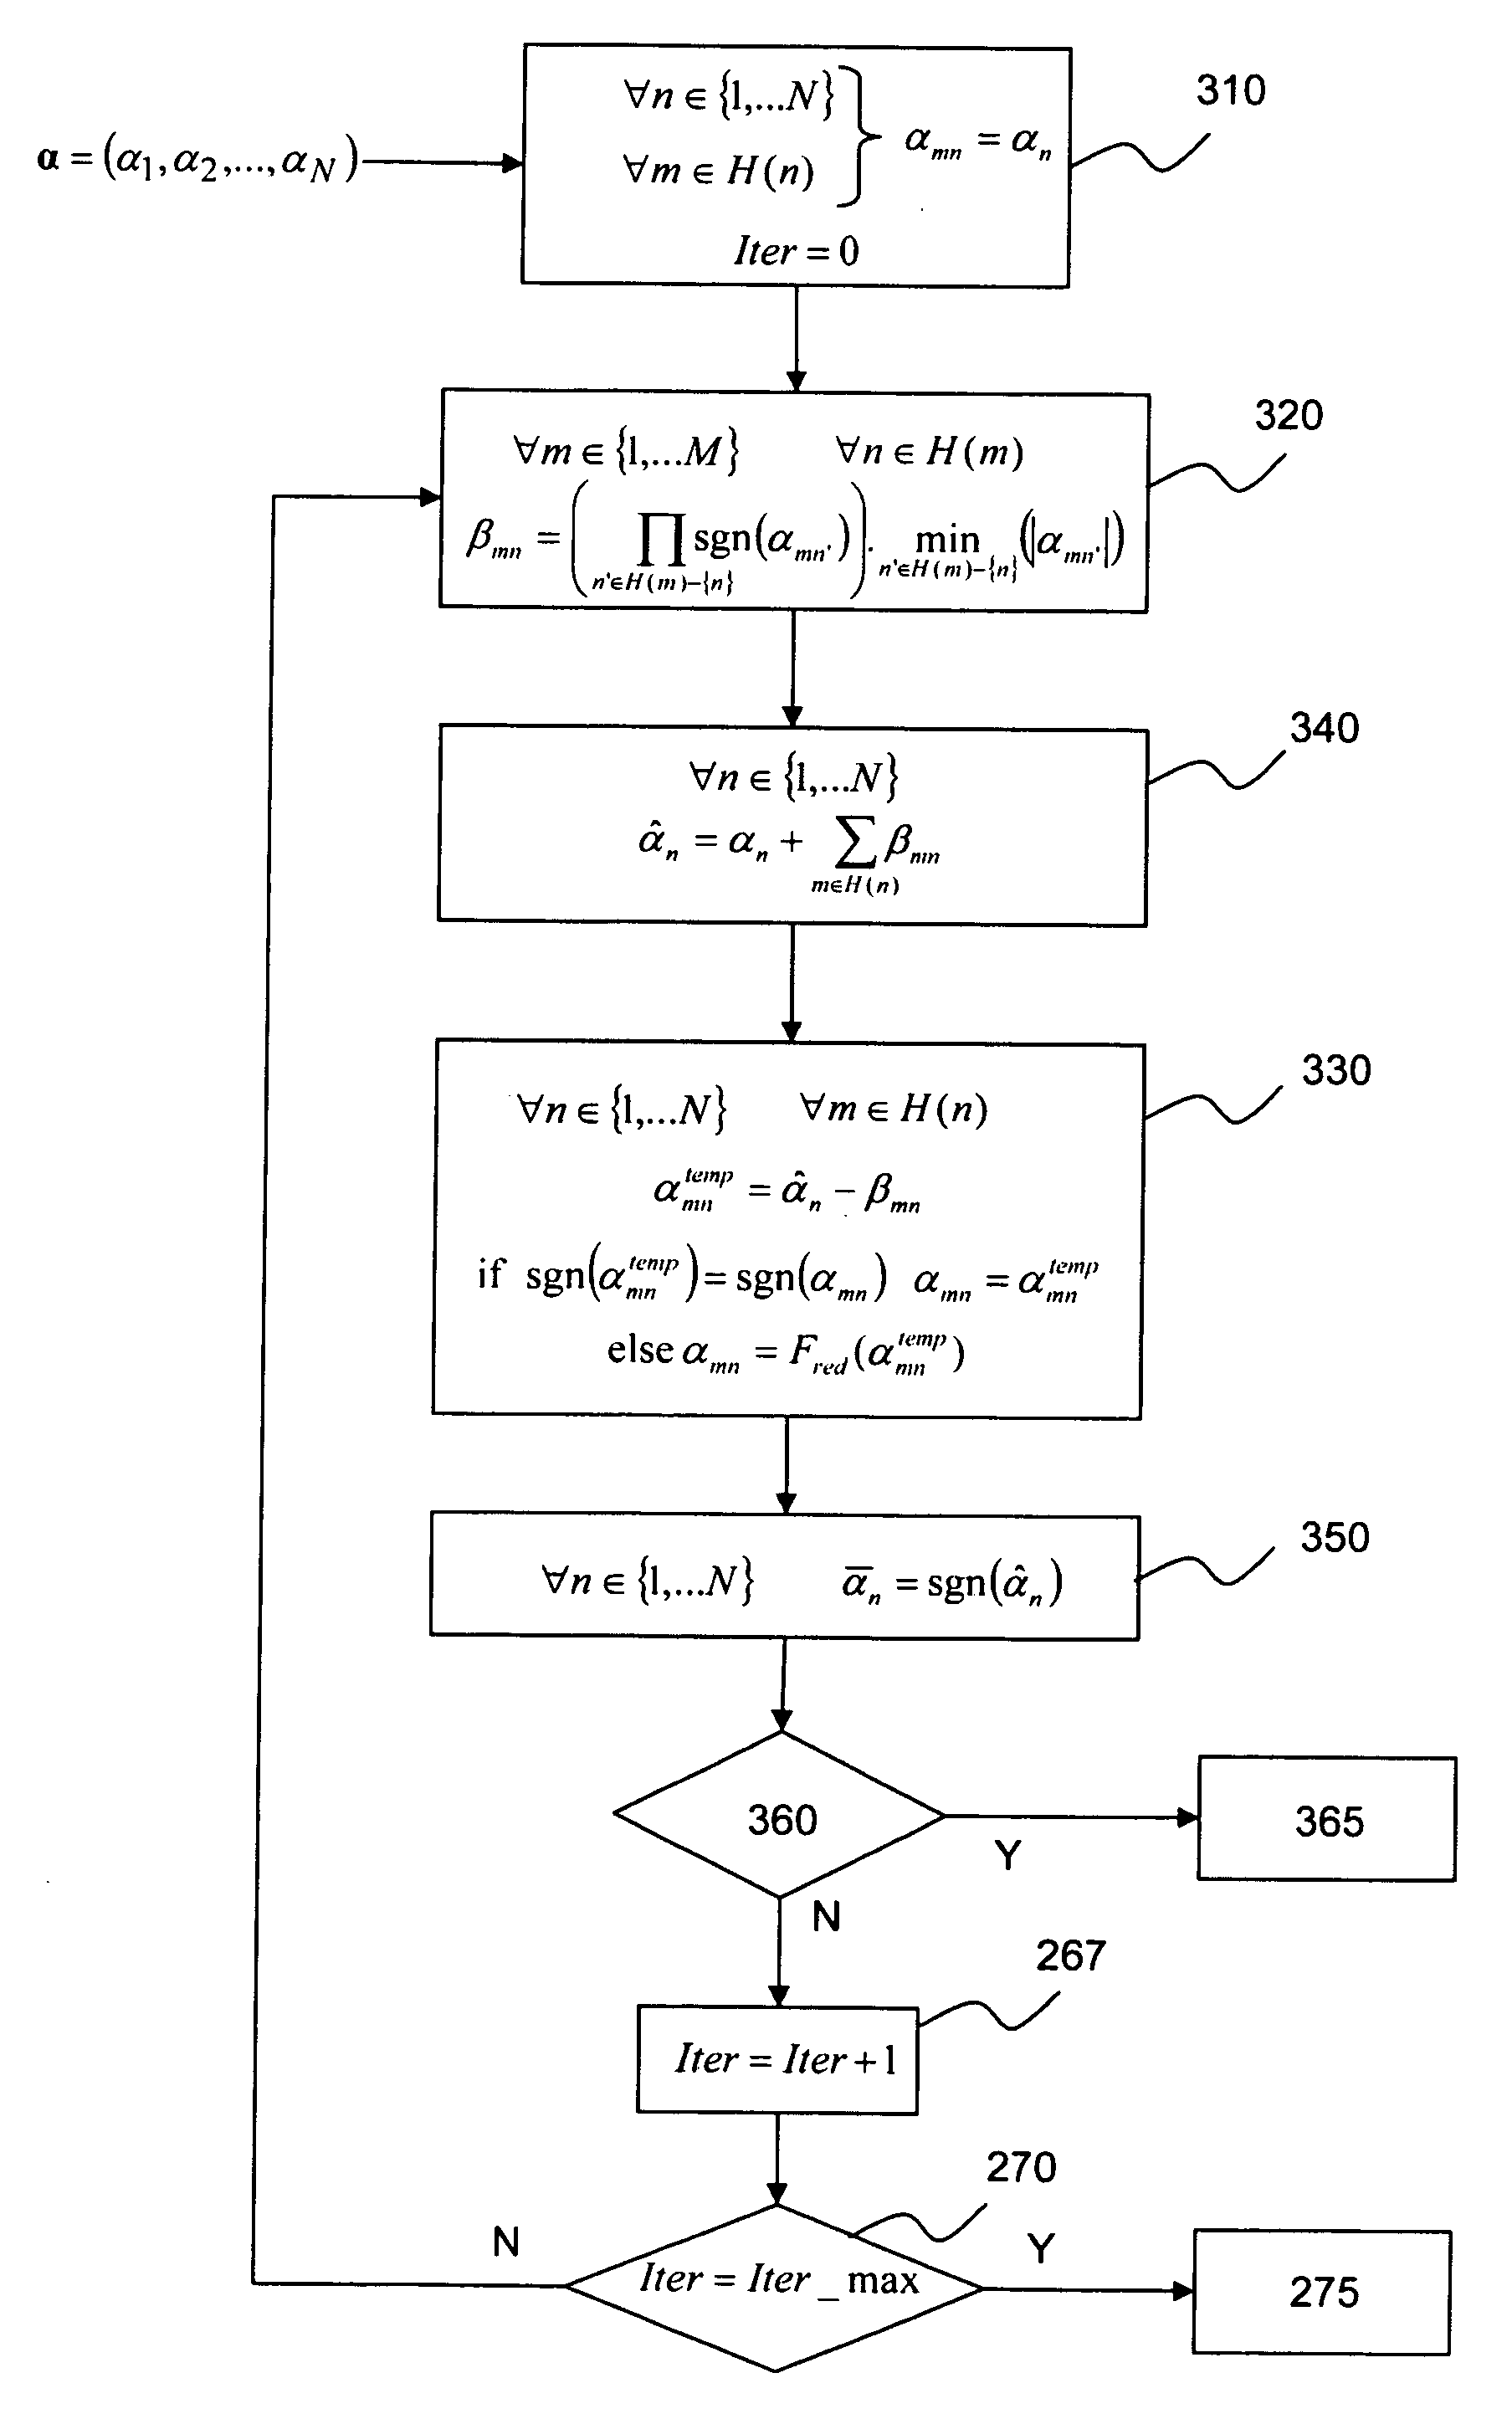 Message- passing and forced convergence decoding method